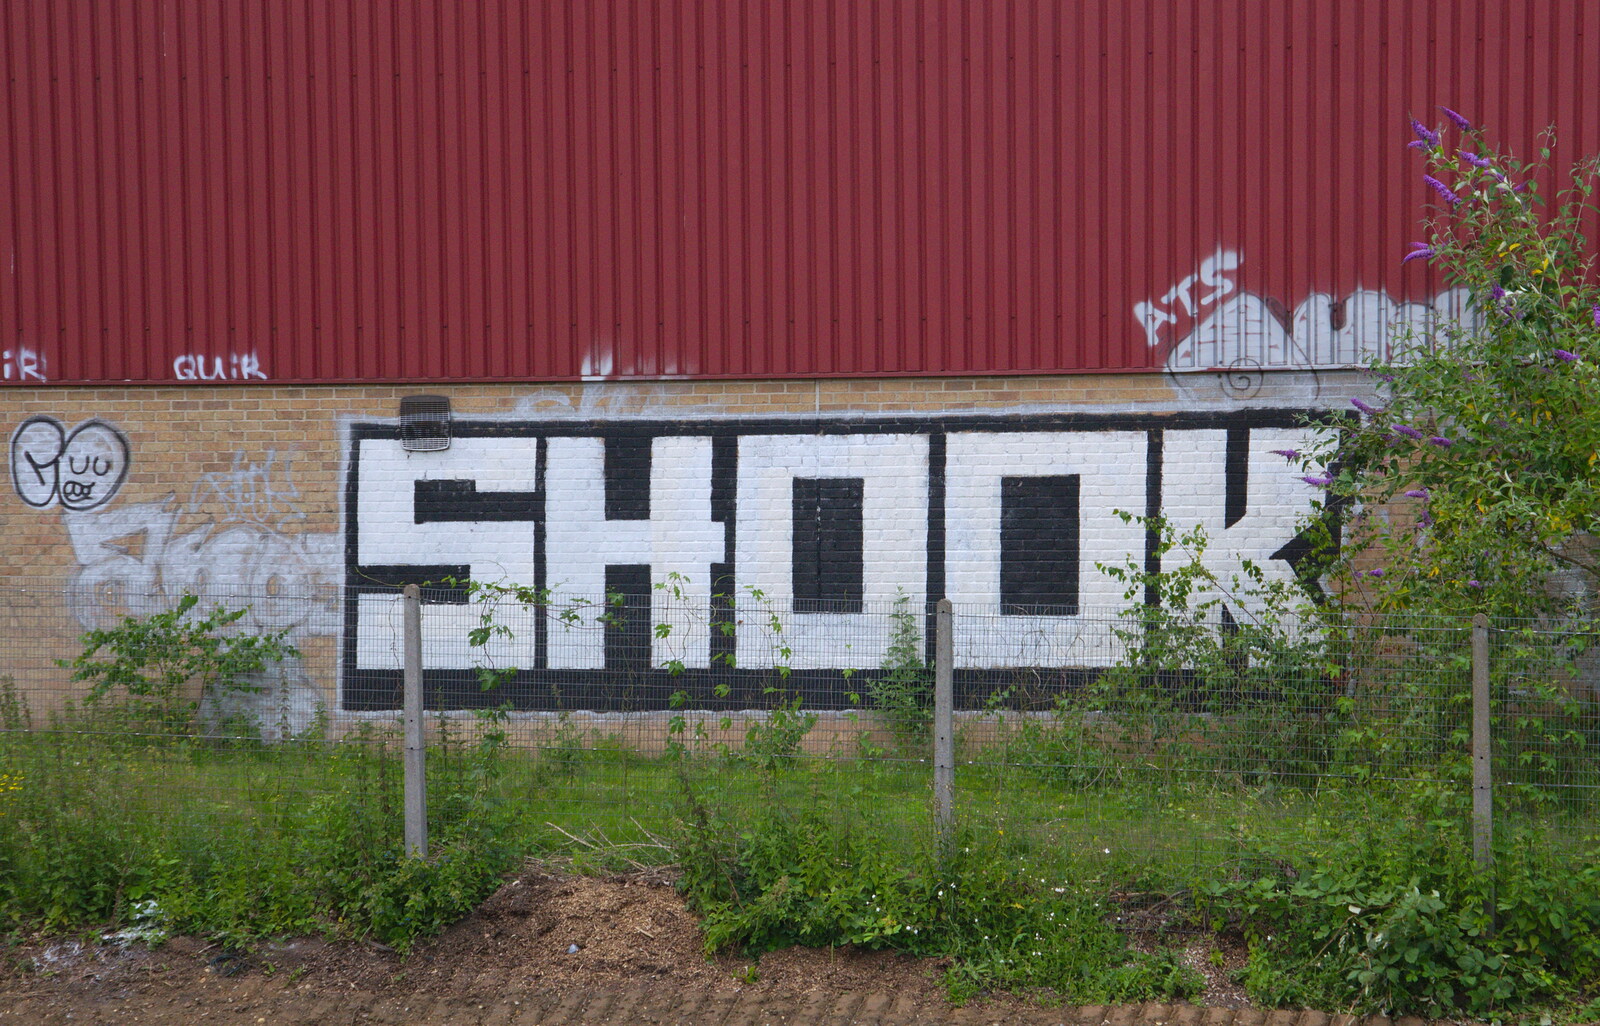 'Shook' graffiti from Kelling Camping and the Potty Morris Festival, Sheringham, North Norfolk - 6th July 2019